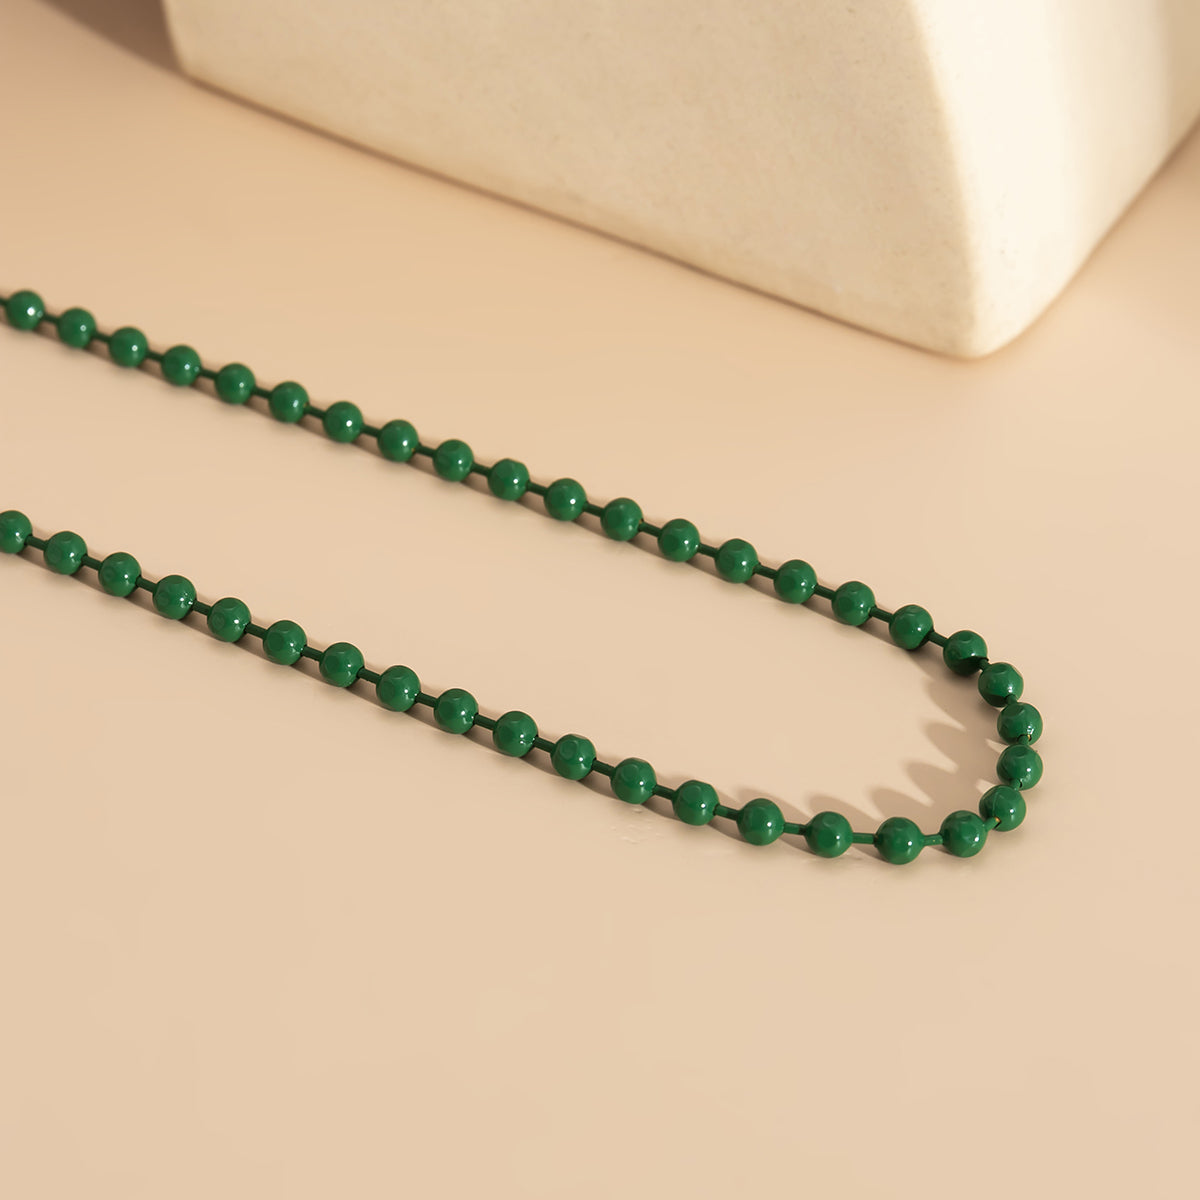 Green Enamel & Silver-Plated Bead Chain Necklace